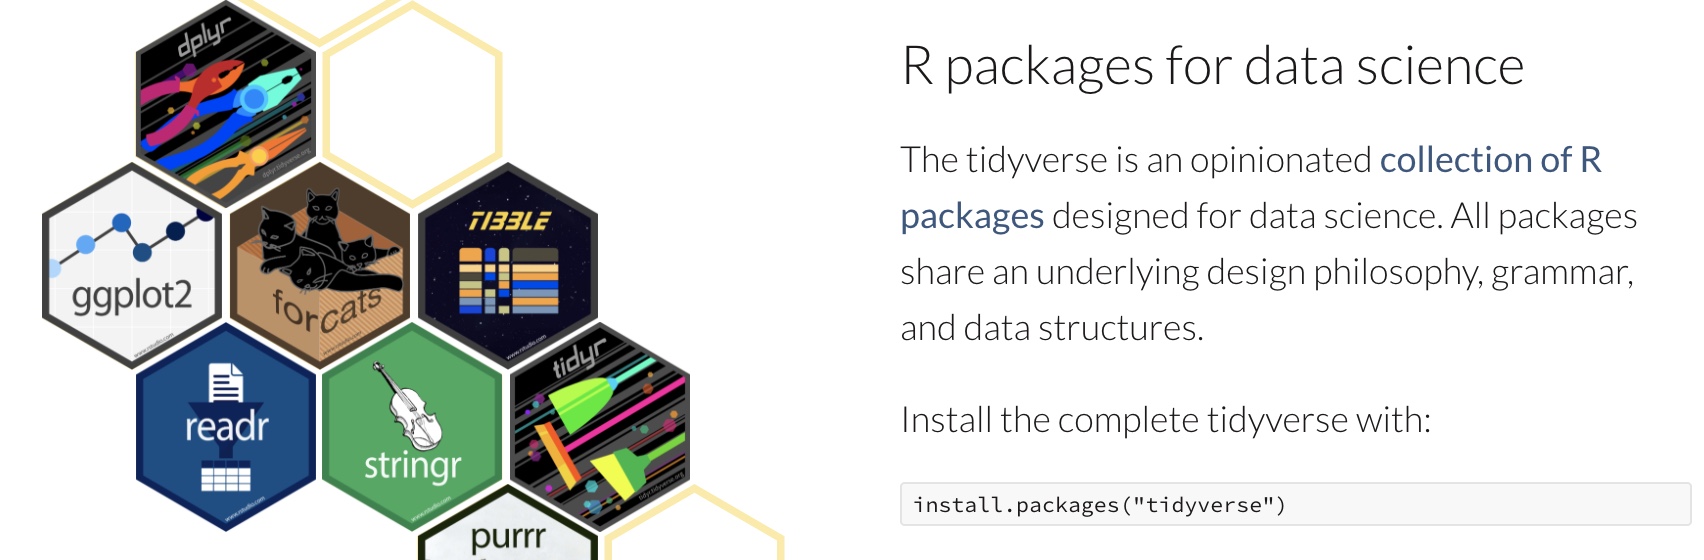 The tidyverse is an opinionated collection of R packages... shar[ing] an underlying design philosophy, grammar, and data structures. - [tidyverse.org](https://www.tidyverse.org/)